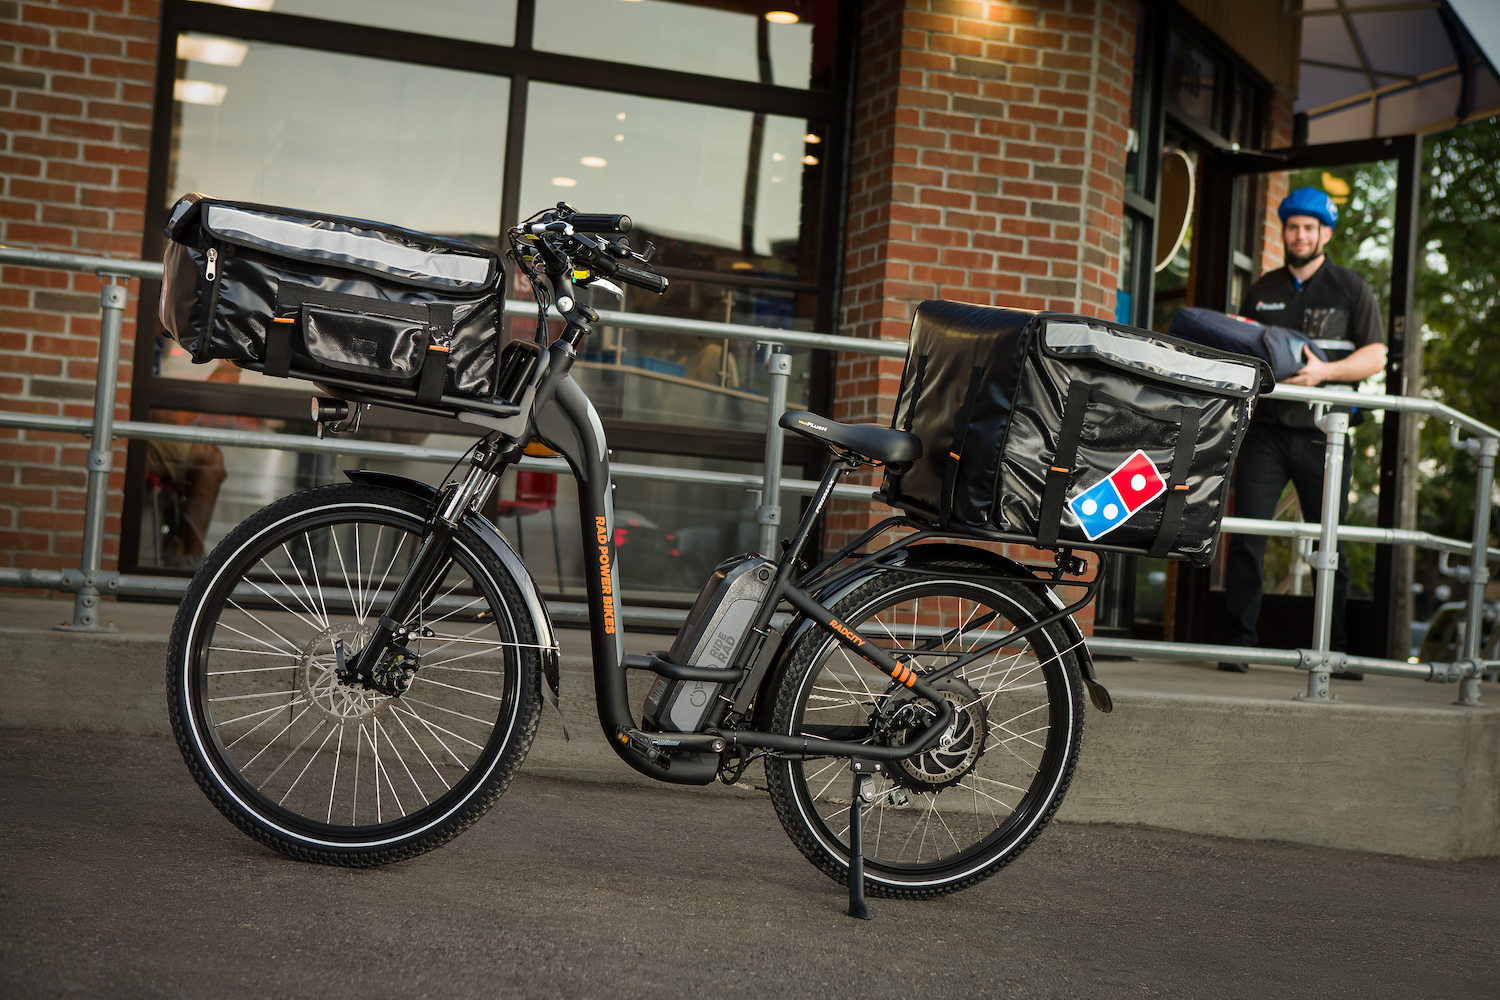 dominos bicycle delivery